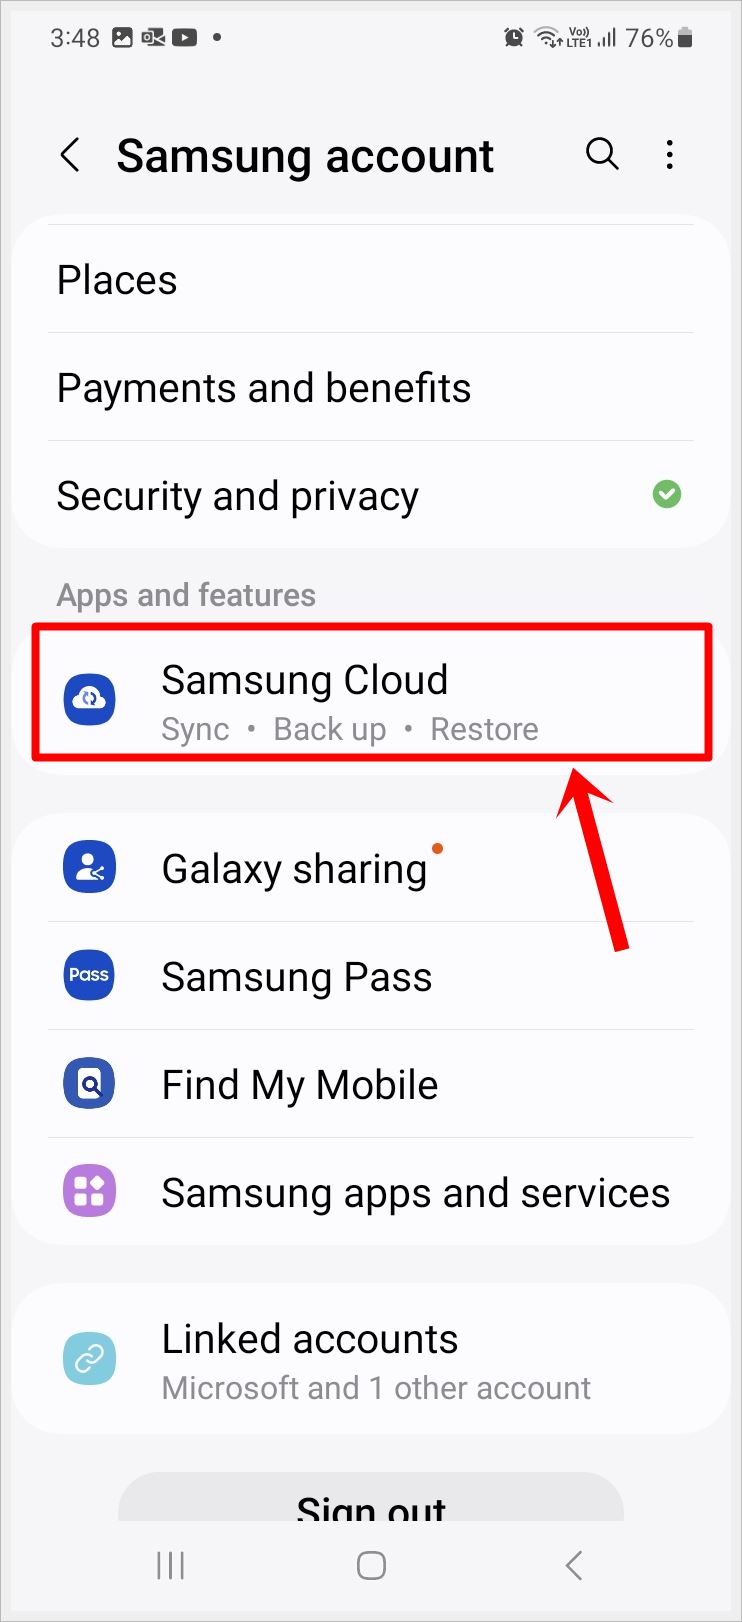 This is a screenshot taken from a Samsung Galaxy phone. It features the 'Samsung Account' page, with the 'Samsung Cloud' option highlighted.